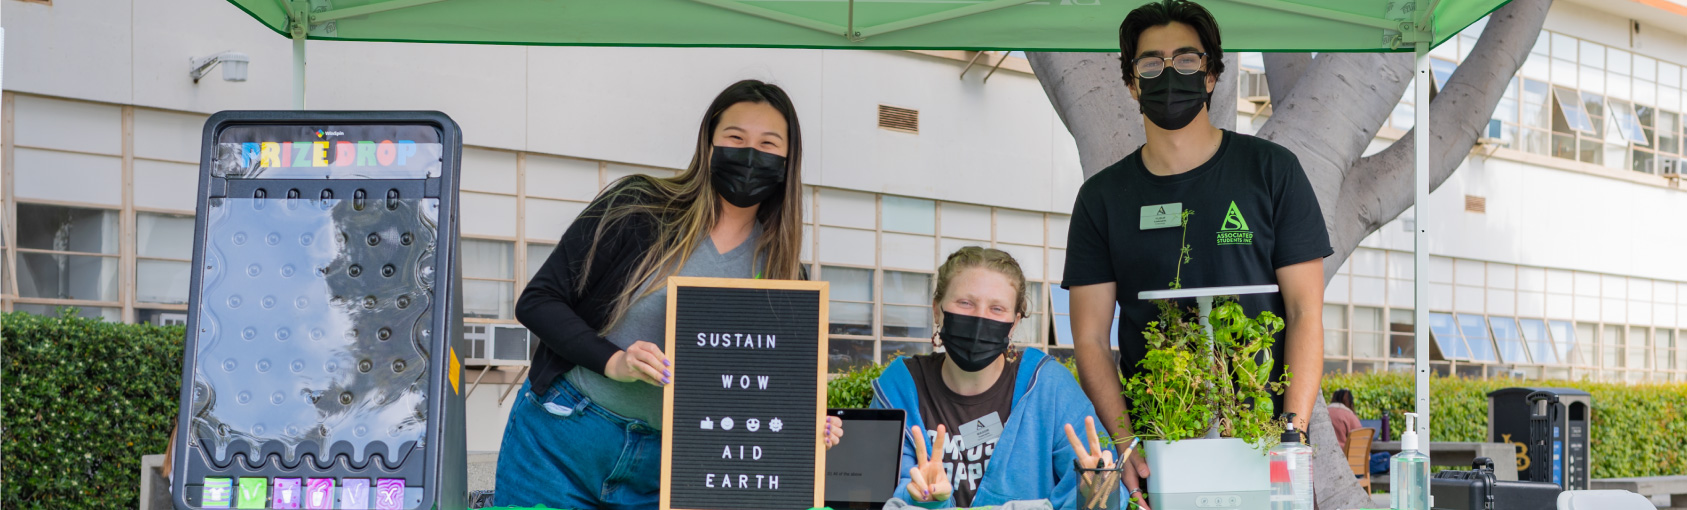 Go Green with Sustain U banner